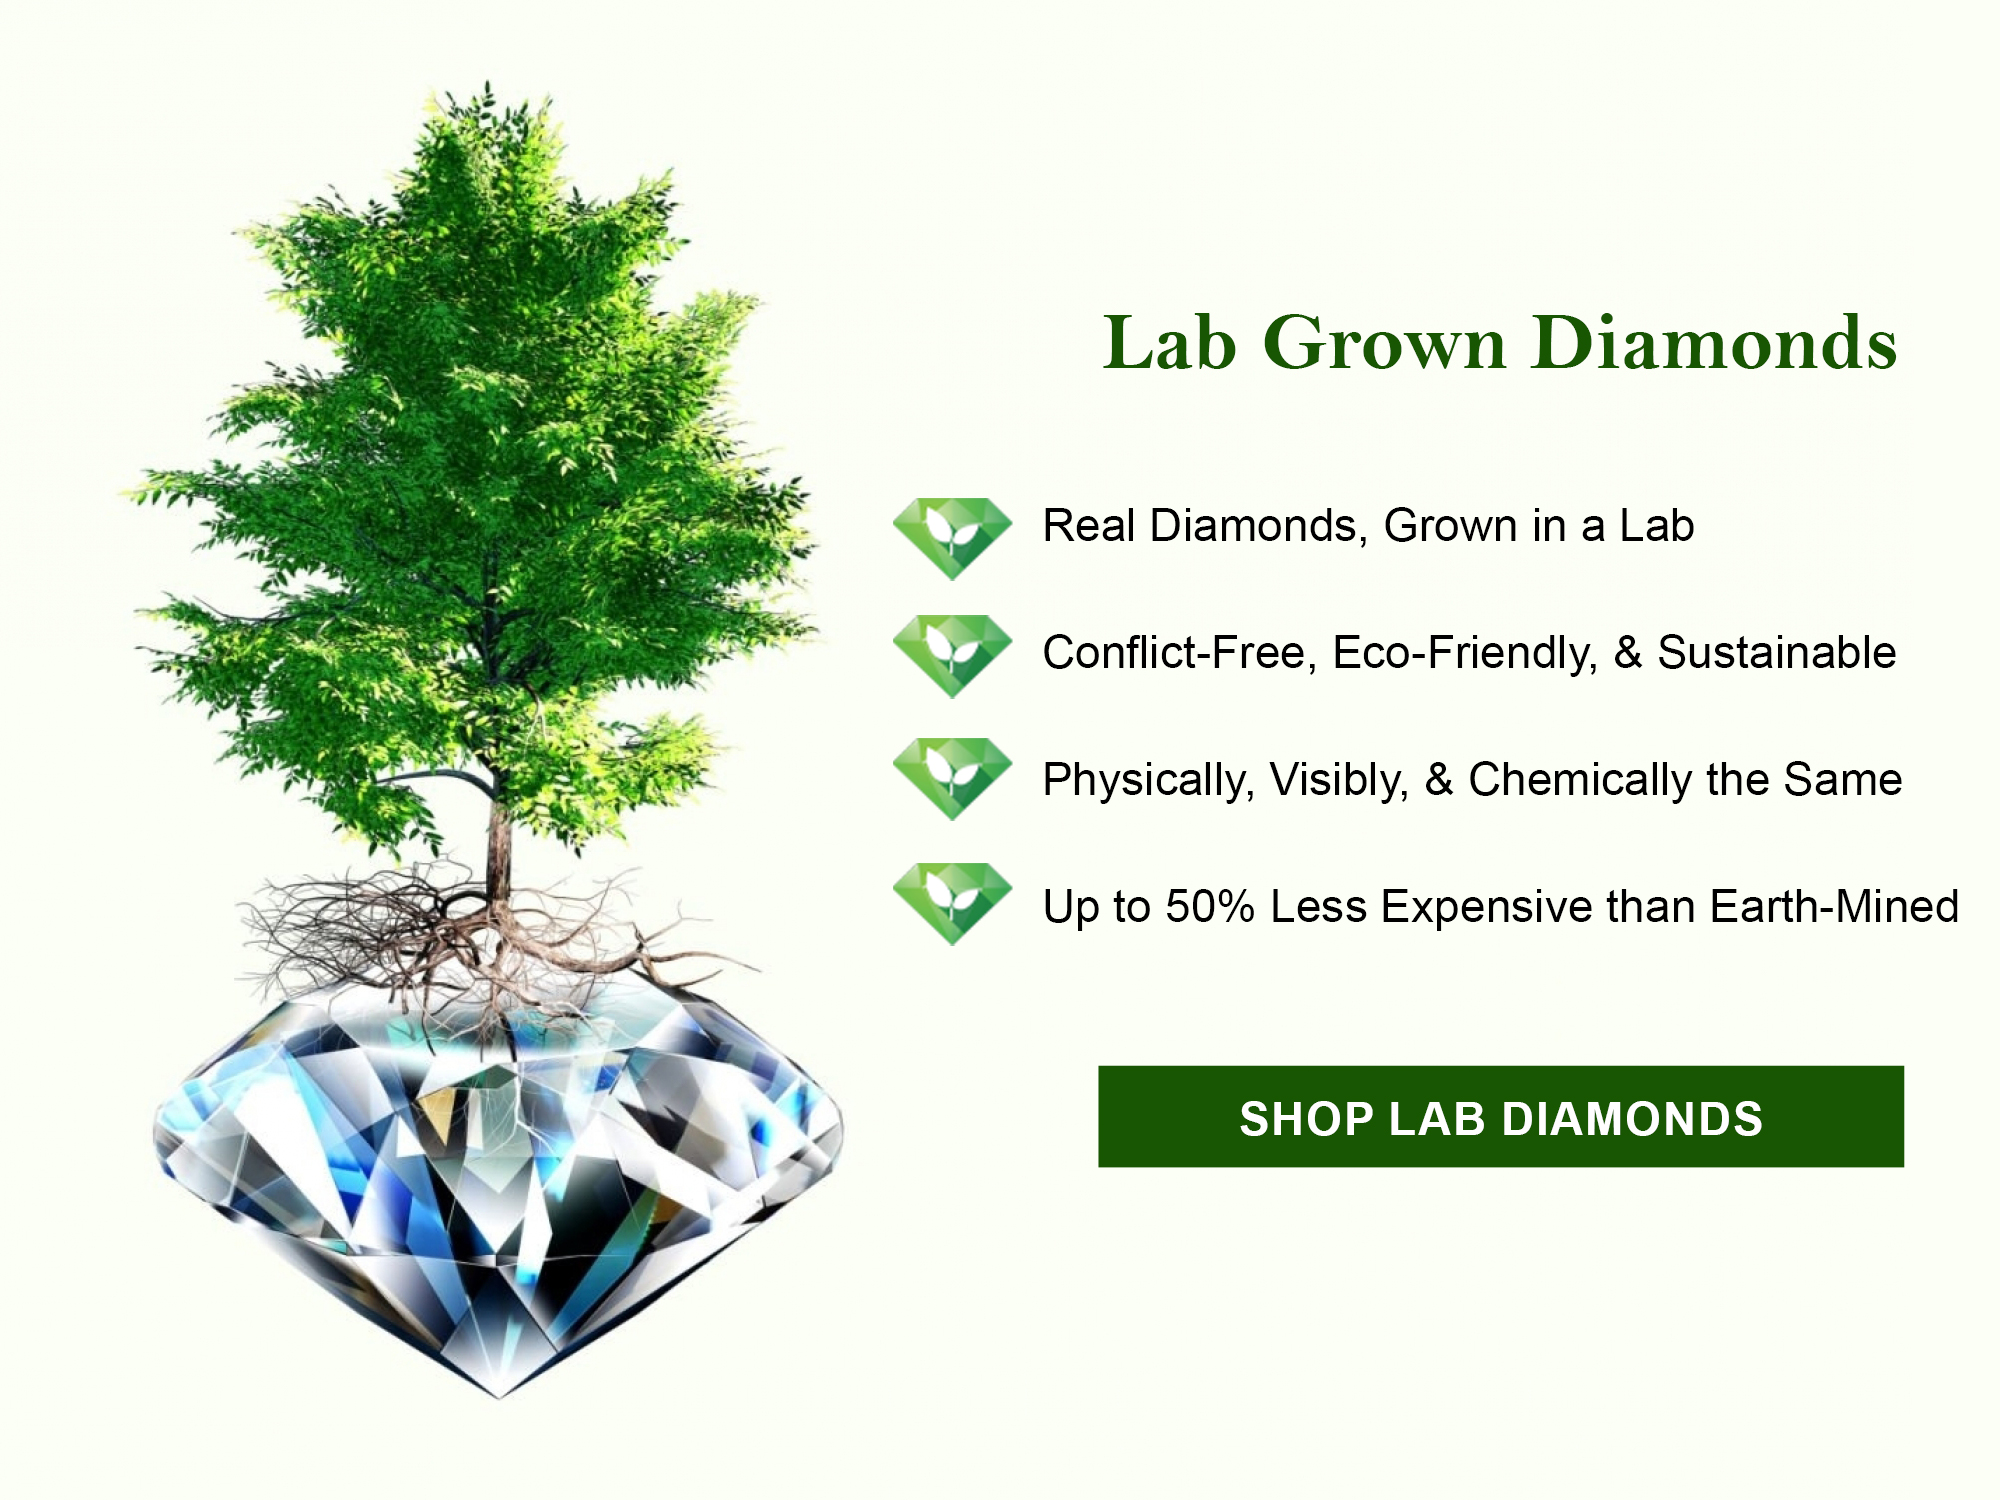 What is lab grown diamonds